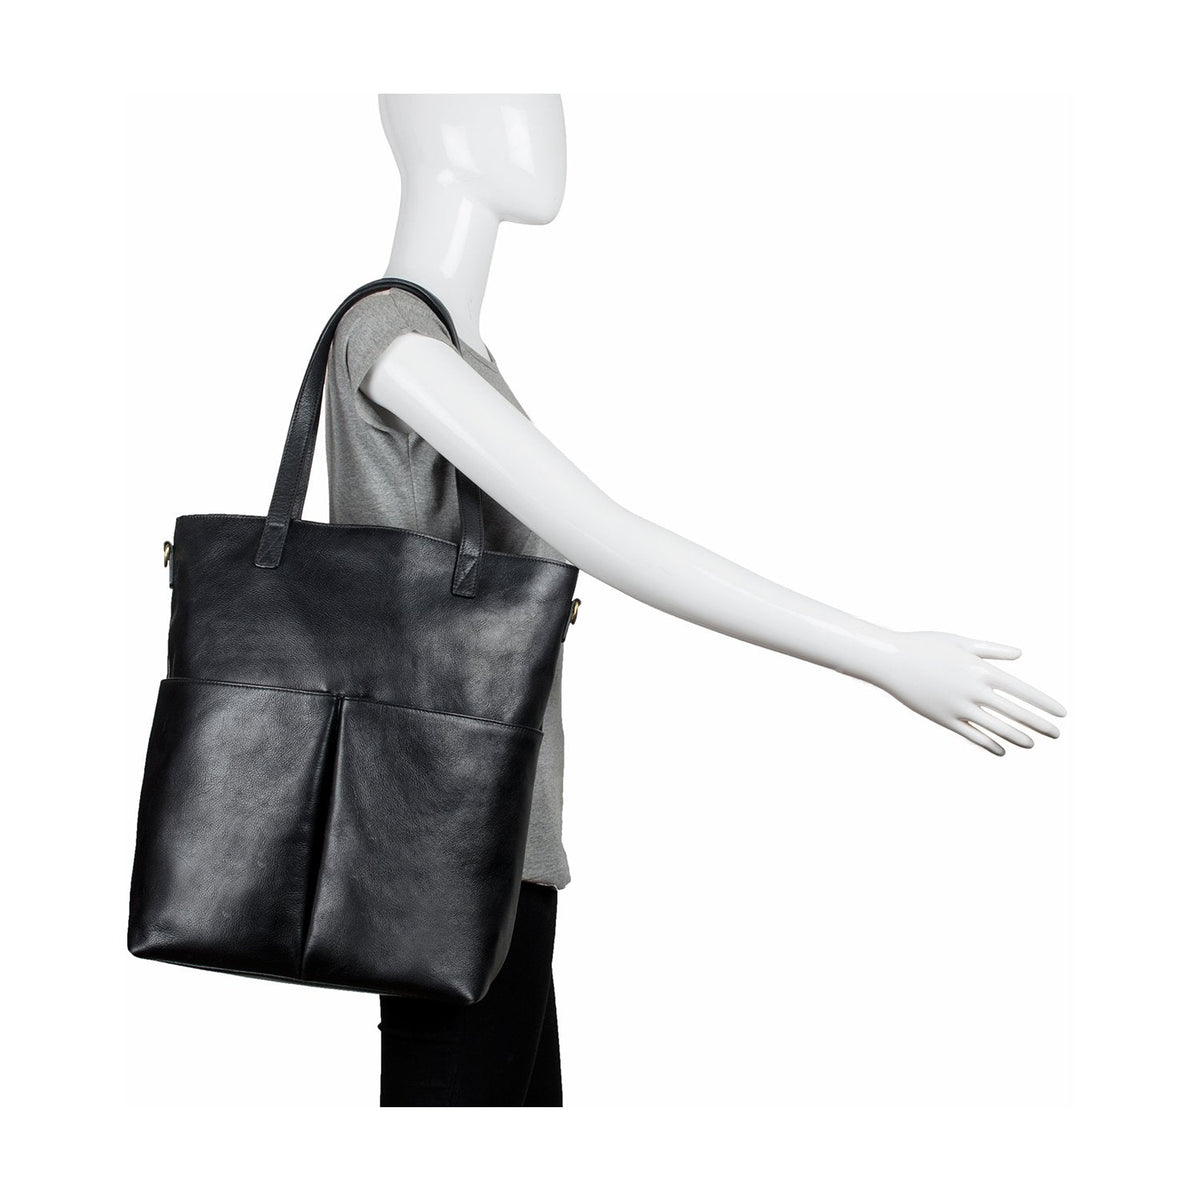 Bags & Luggage - Women's Bags - Shoulder Bags Pepper Large Leather Tote With Sling Strap